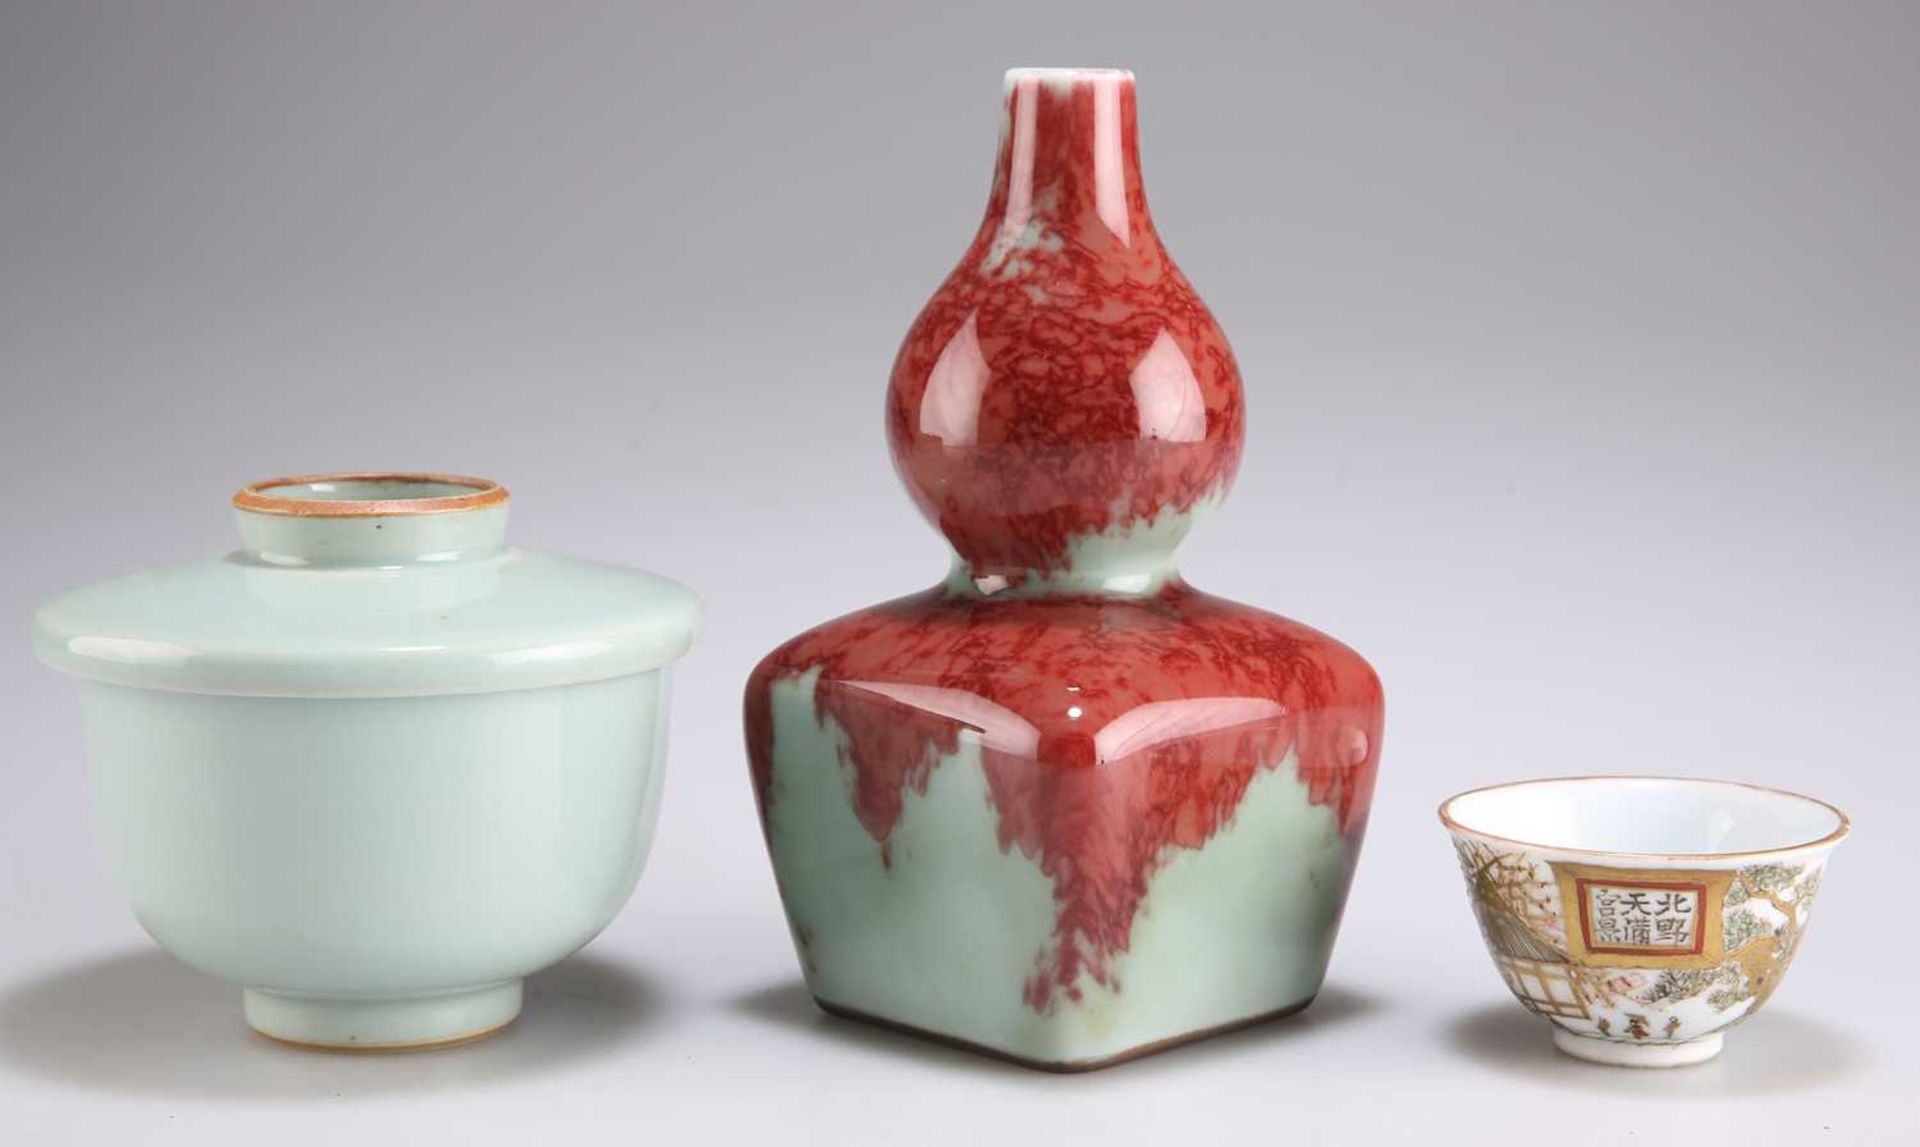 A CHINESE GOURD VASE, A JAPANESE GILDED TEA BOWL AND A JAPANESE CELADON GROUND COVERED BOWL